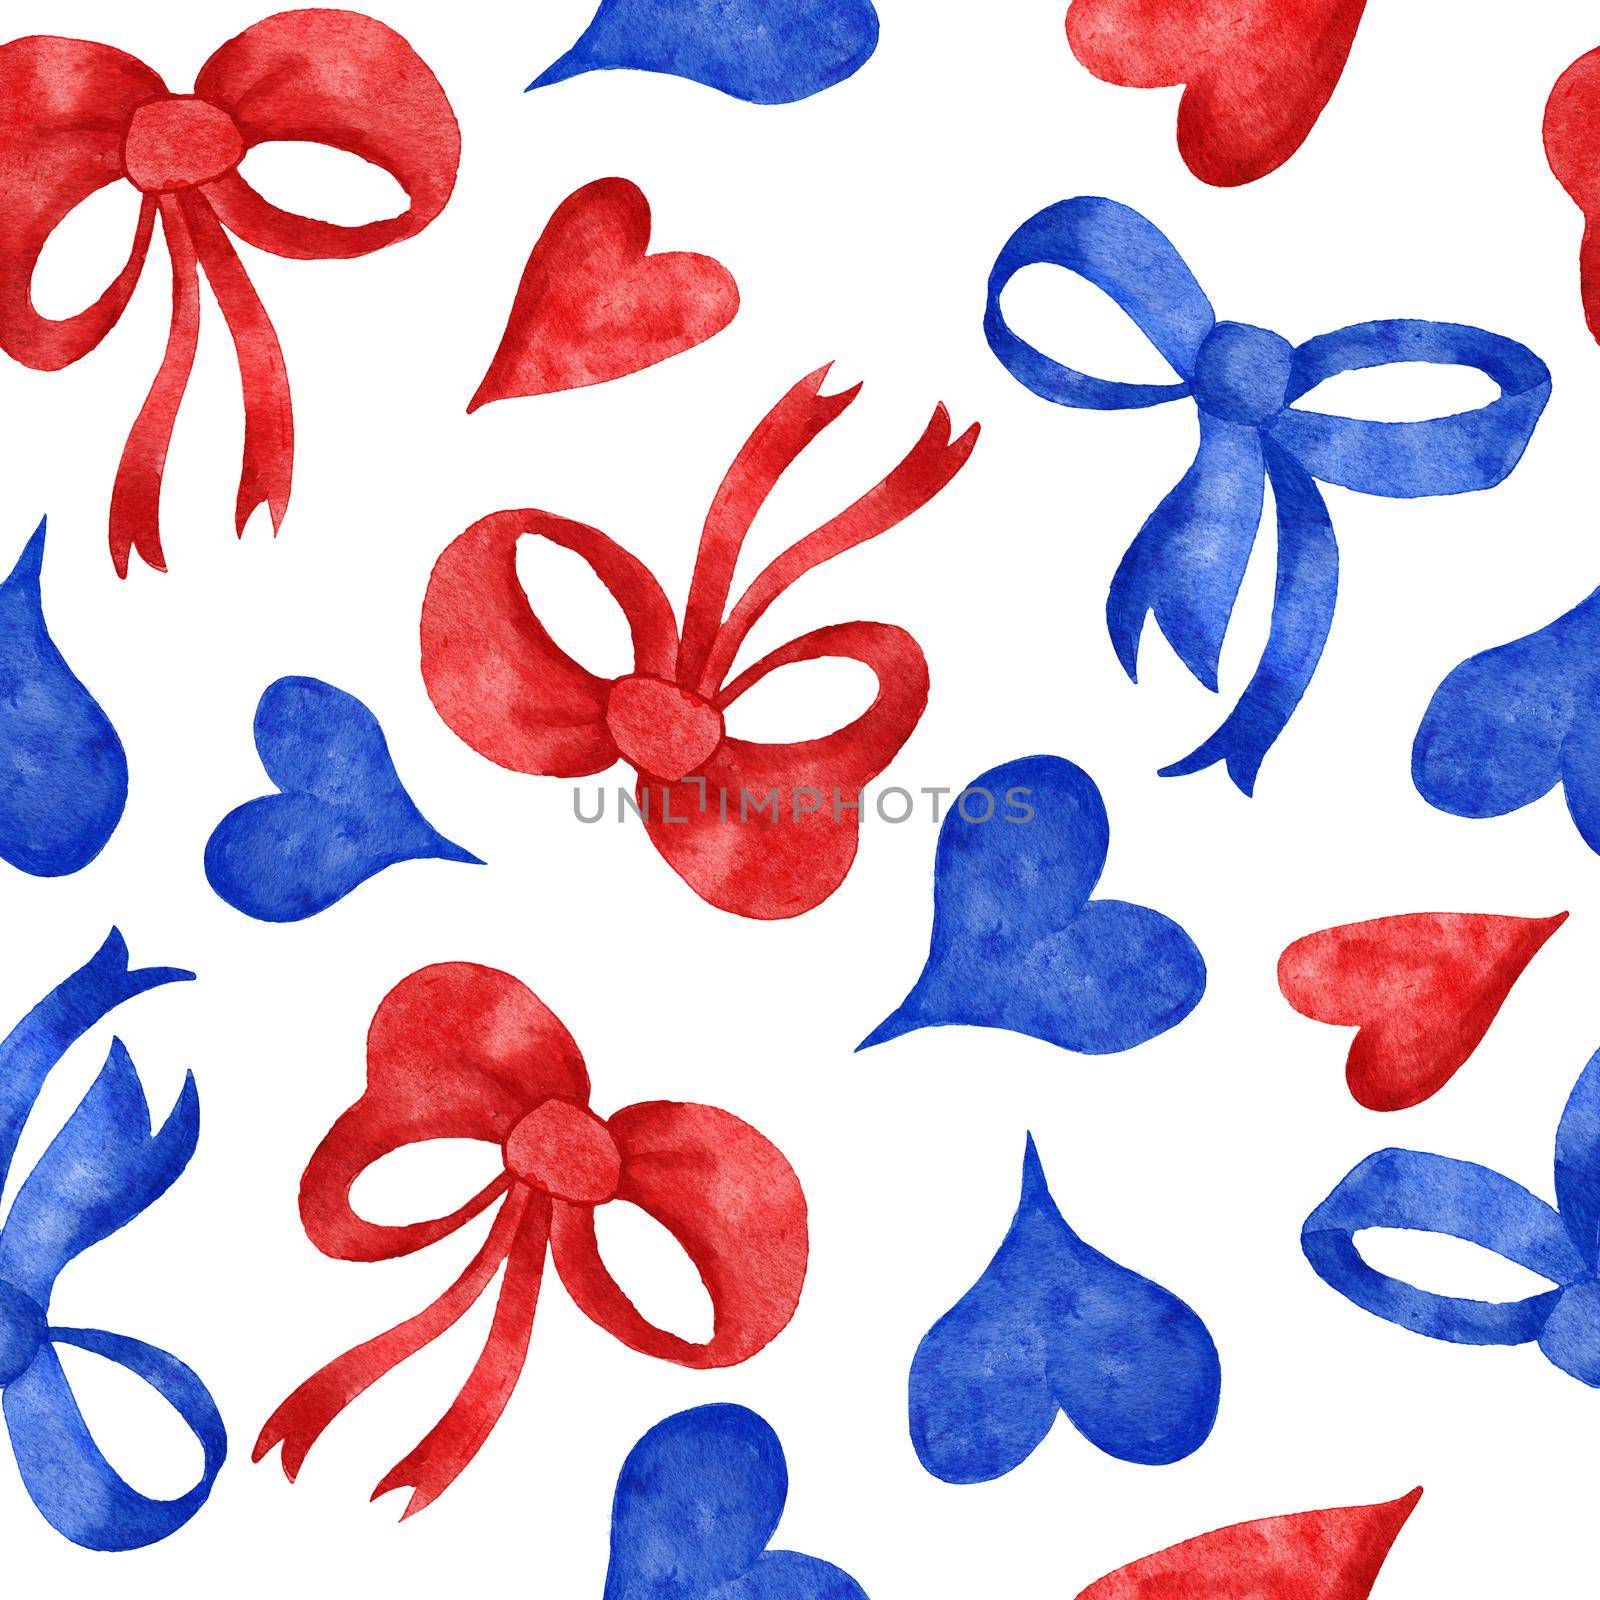 Watercolor hand drawn seamless patriotic american pattern with 4th of july balloons hearts hat flowers. Fourth of july Independence day US fabric print, blue red white background stars stripes. by Lagmar